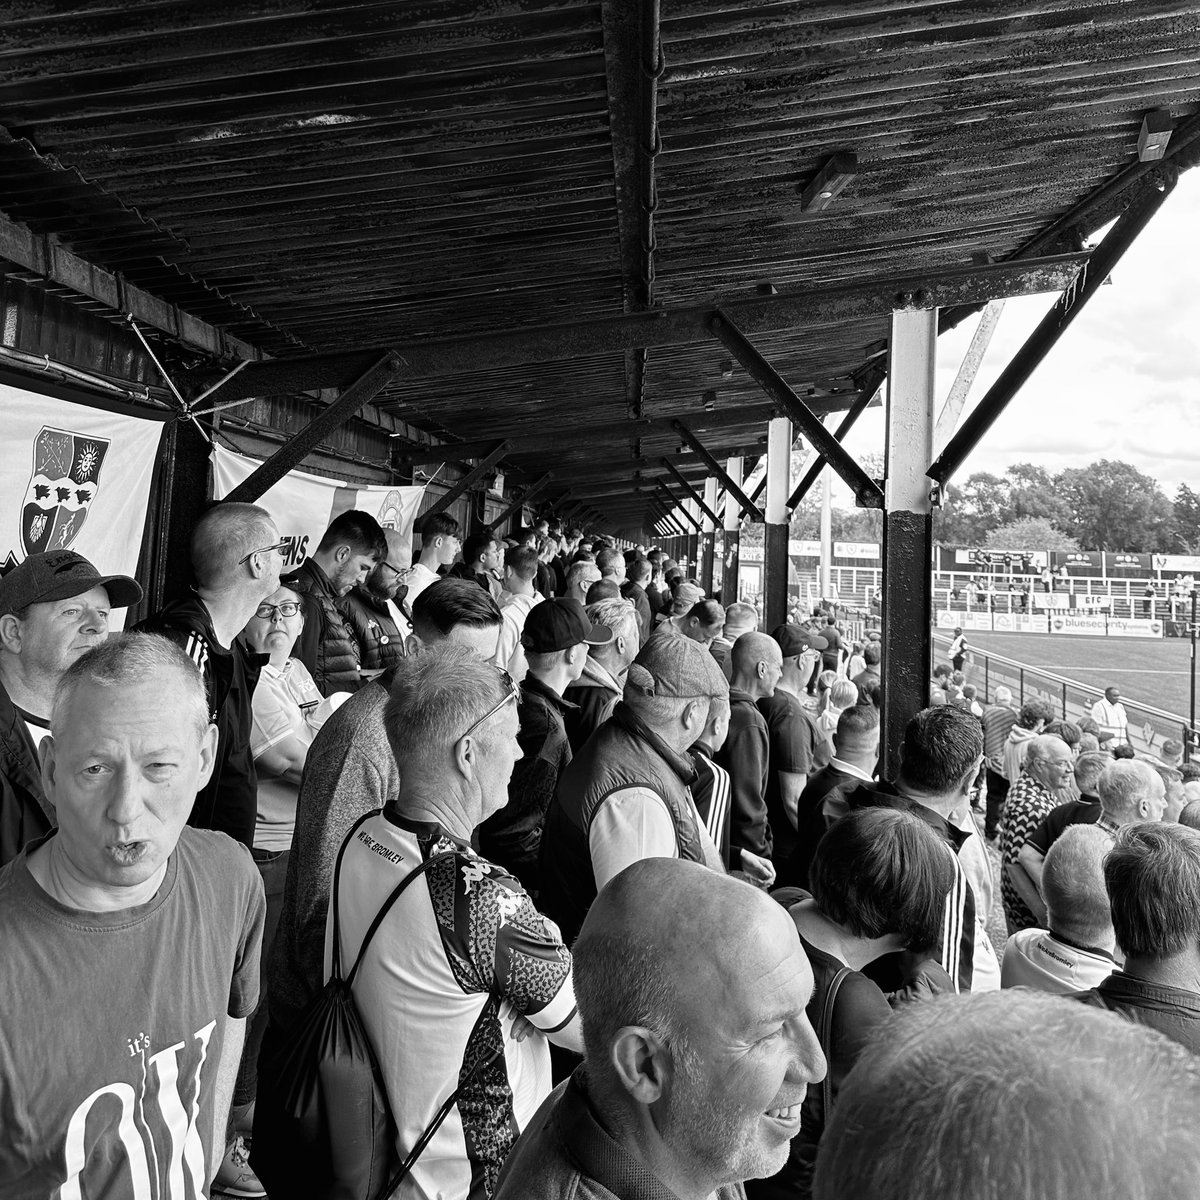 North Terrace, Hayes Lane, Bromley FC

#WeAreBromley 
#BromleyFC 
#footballculture 
#groundhopping 
#footballphotography 
#footballphotographer 
#footballphoto 
#thechickenbaltichronicles 
#shotoniphone 
#iphonephotography 
#iphoneography